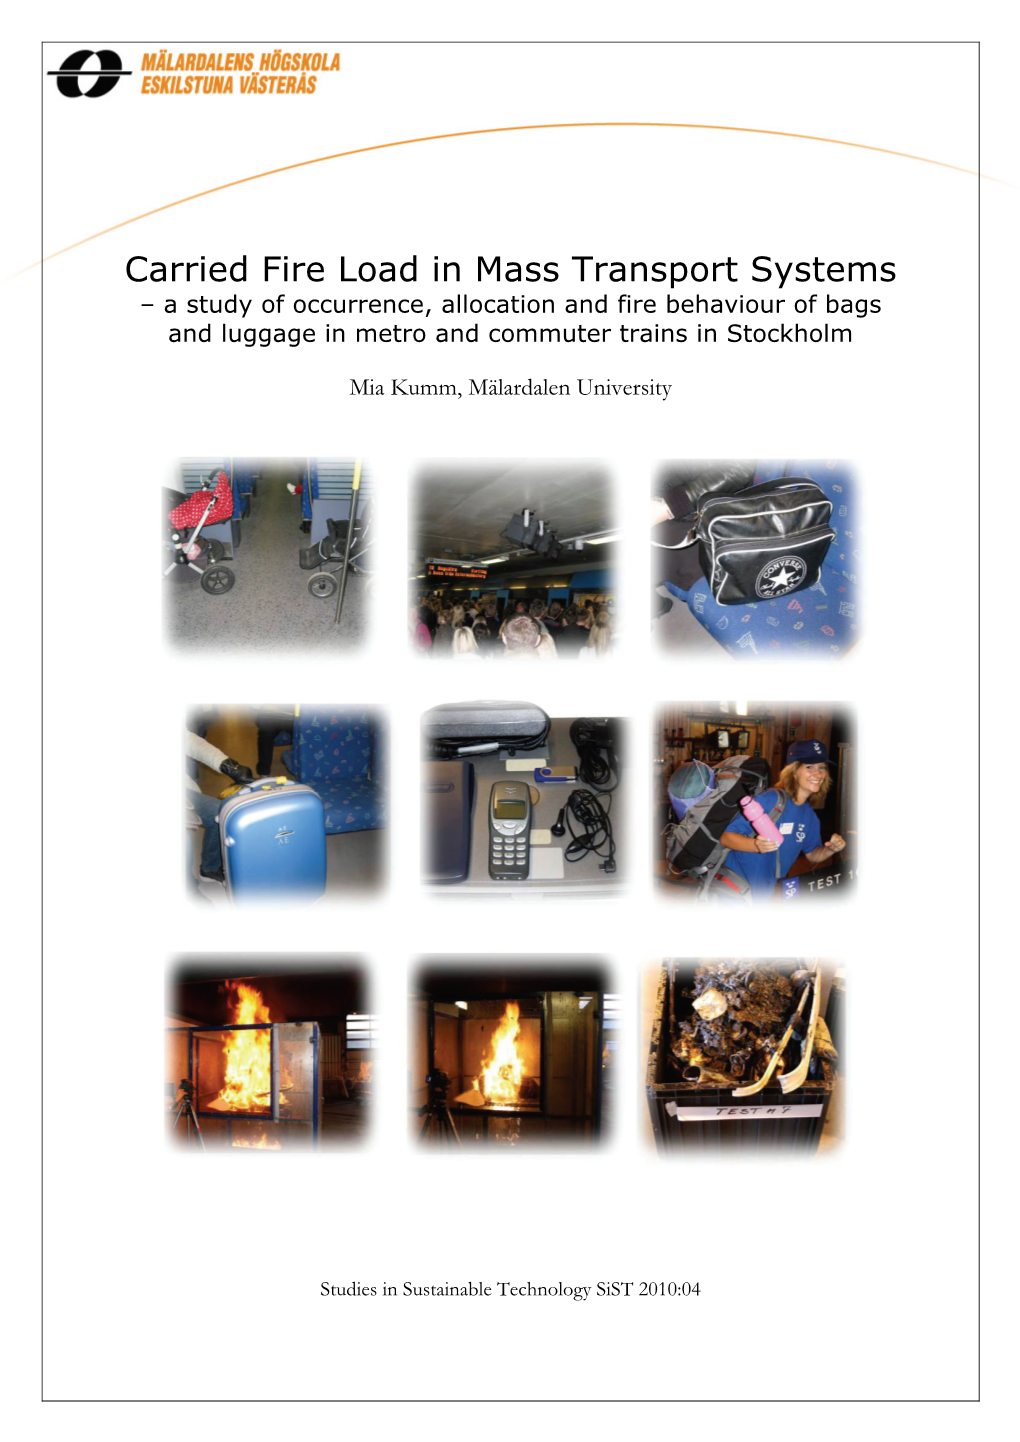 Carried Fire Load in Mass Transport Systems – a Study of Occurrence, Allocation and Fire Behaviour of Bags and Luggage in Metro and Commuter Trains in Stockholm